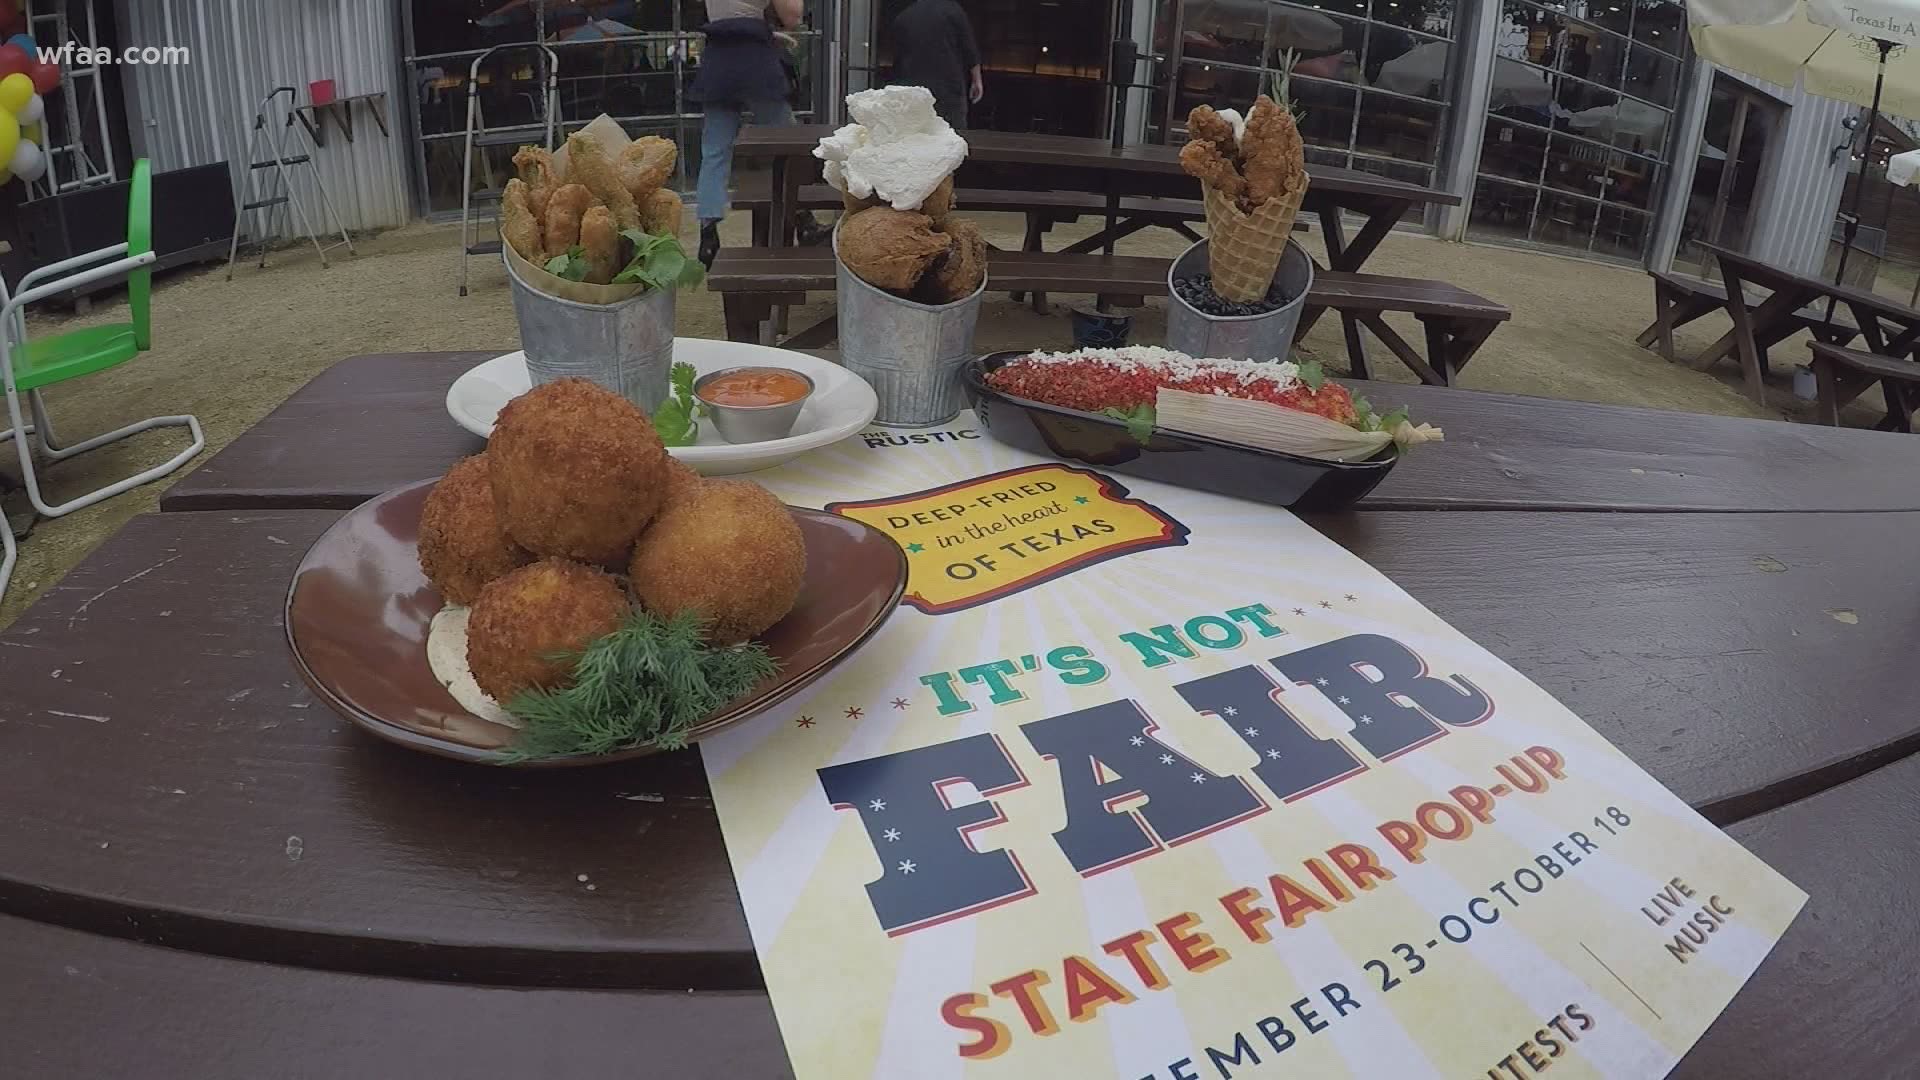 Hungry fairgoers can still get their hands on some creative concoctions this year.